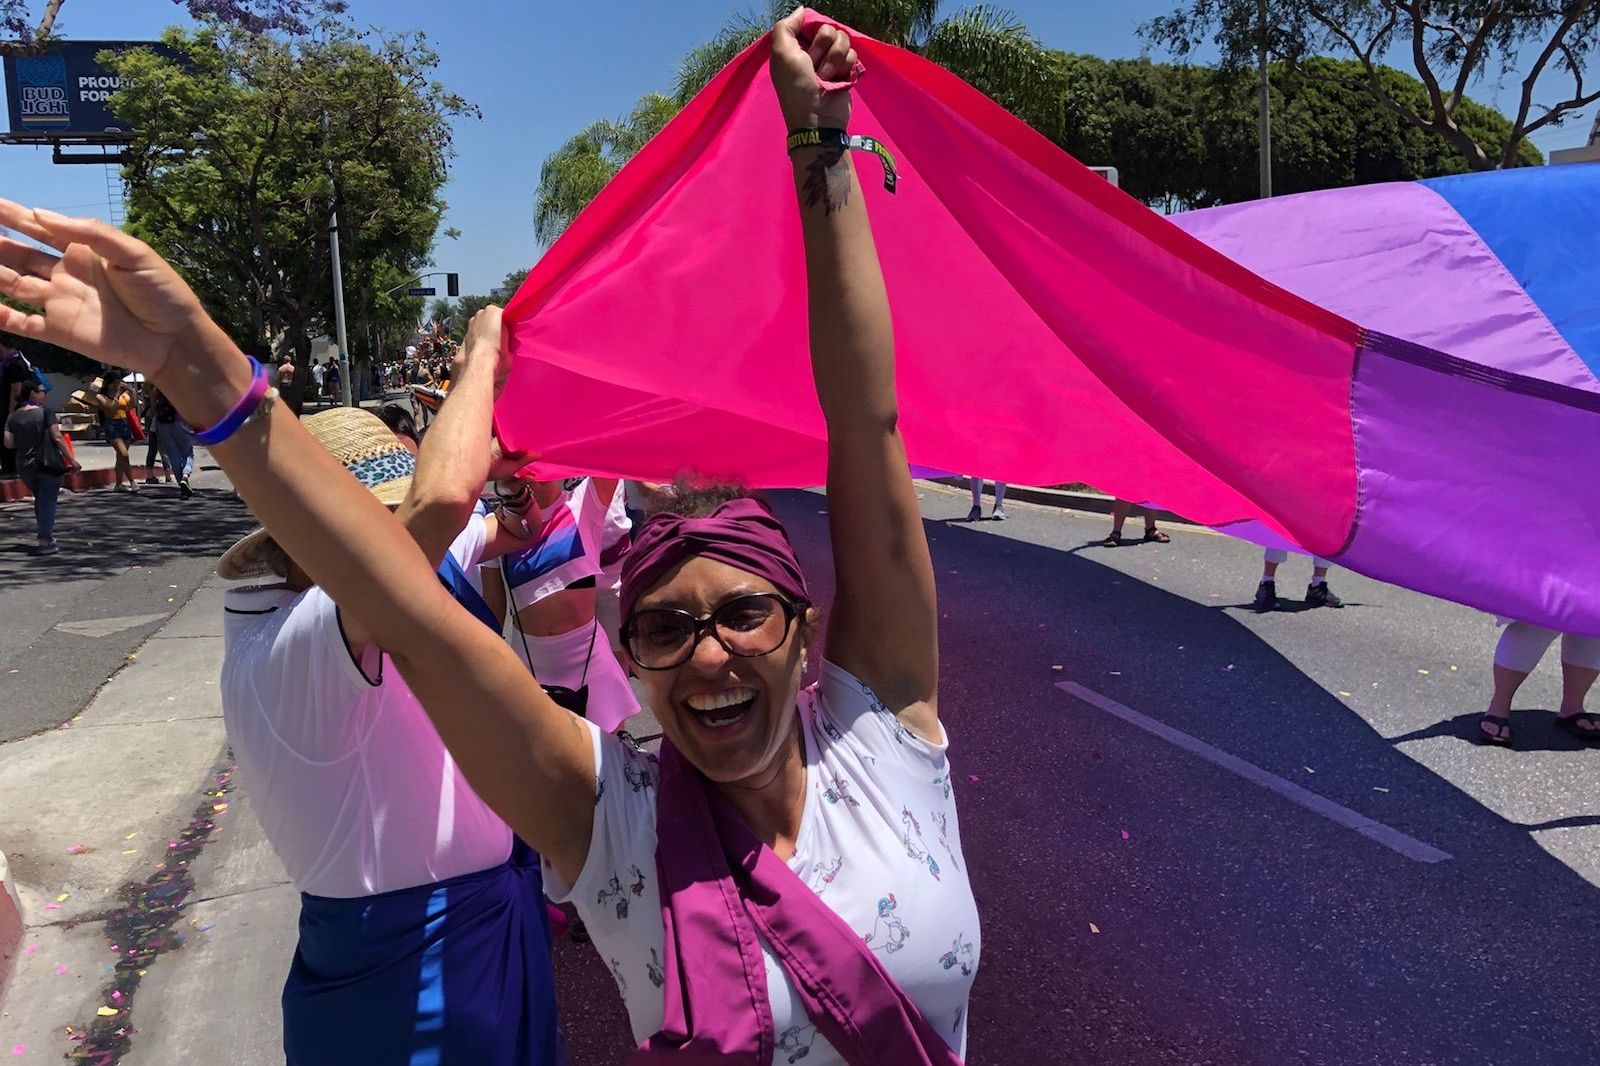 Lorien smiling holding a part of the bi flag during pride.